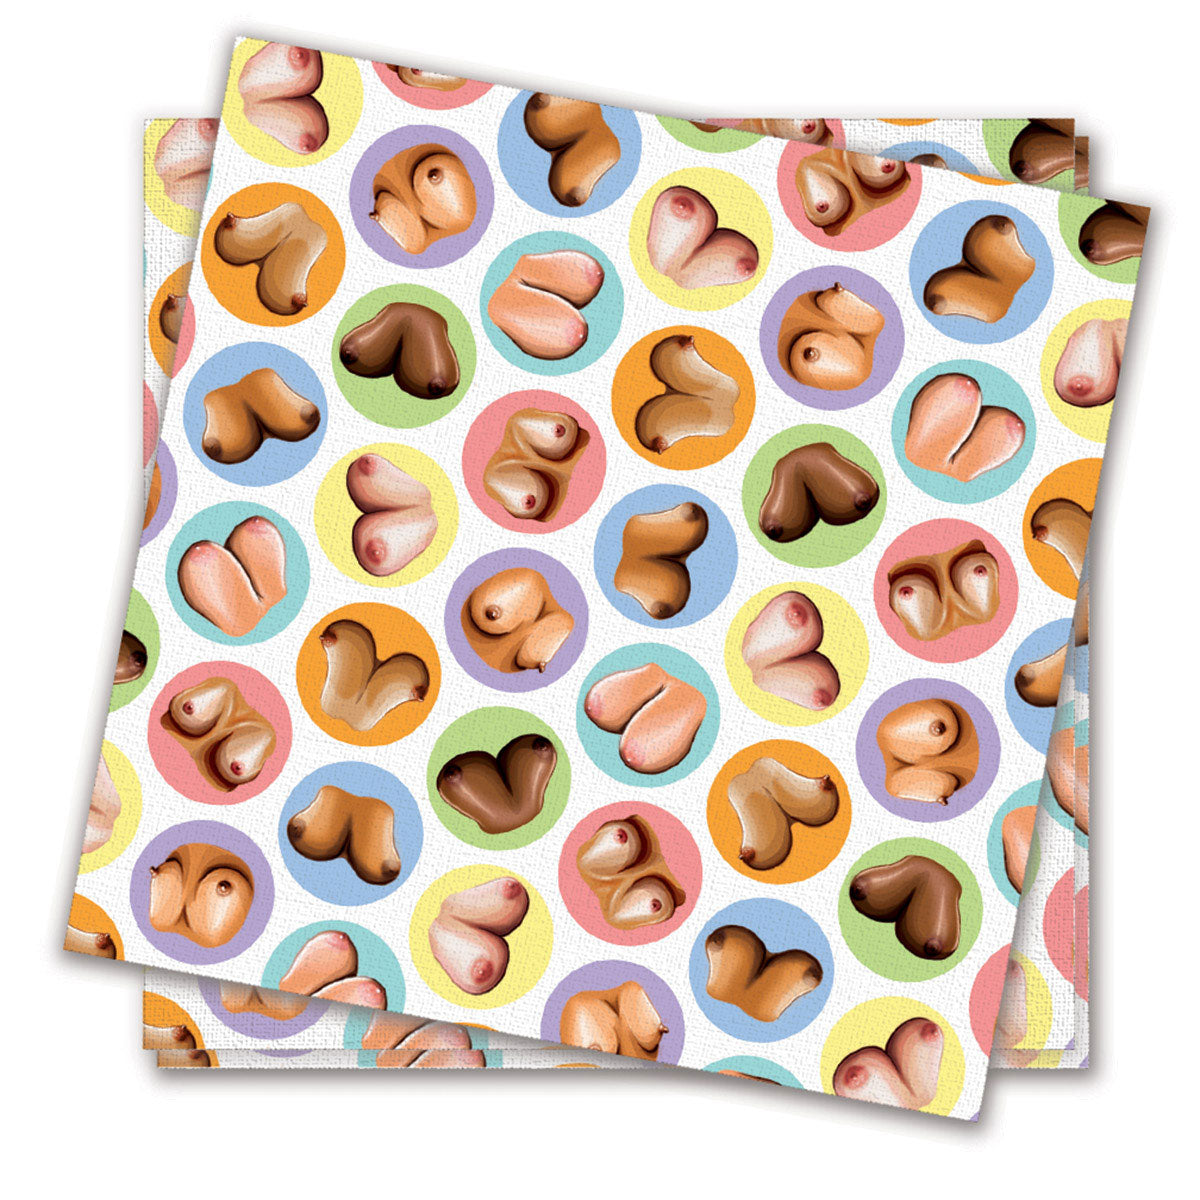 Candyprints Boobs Na packins - 8 pack